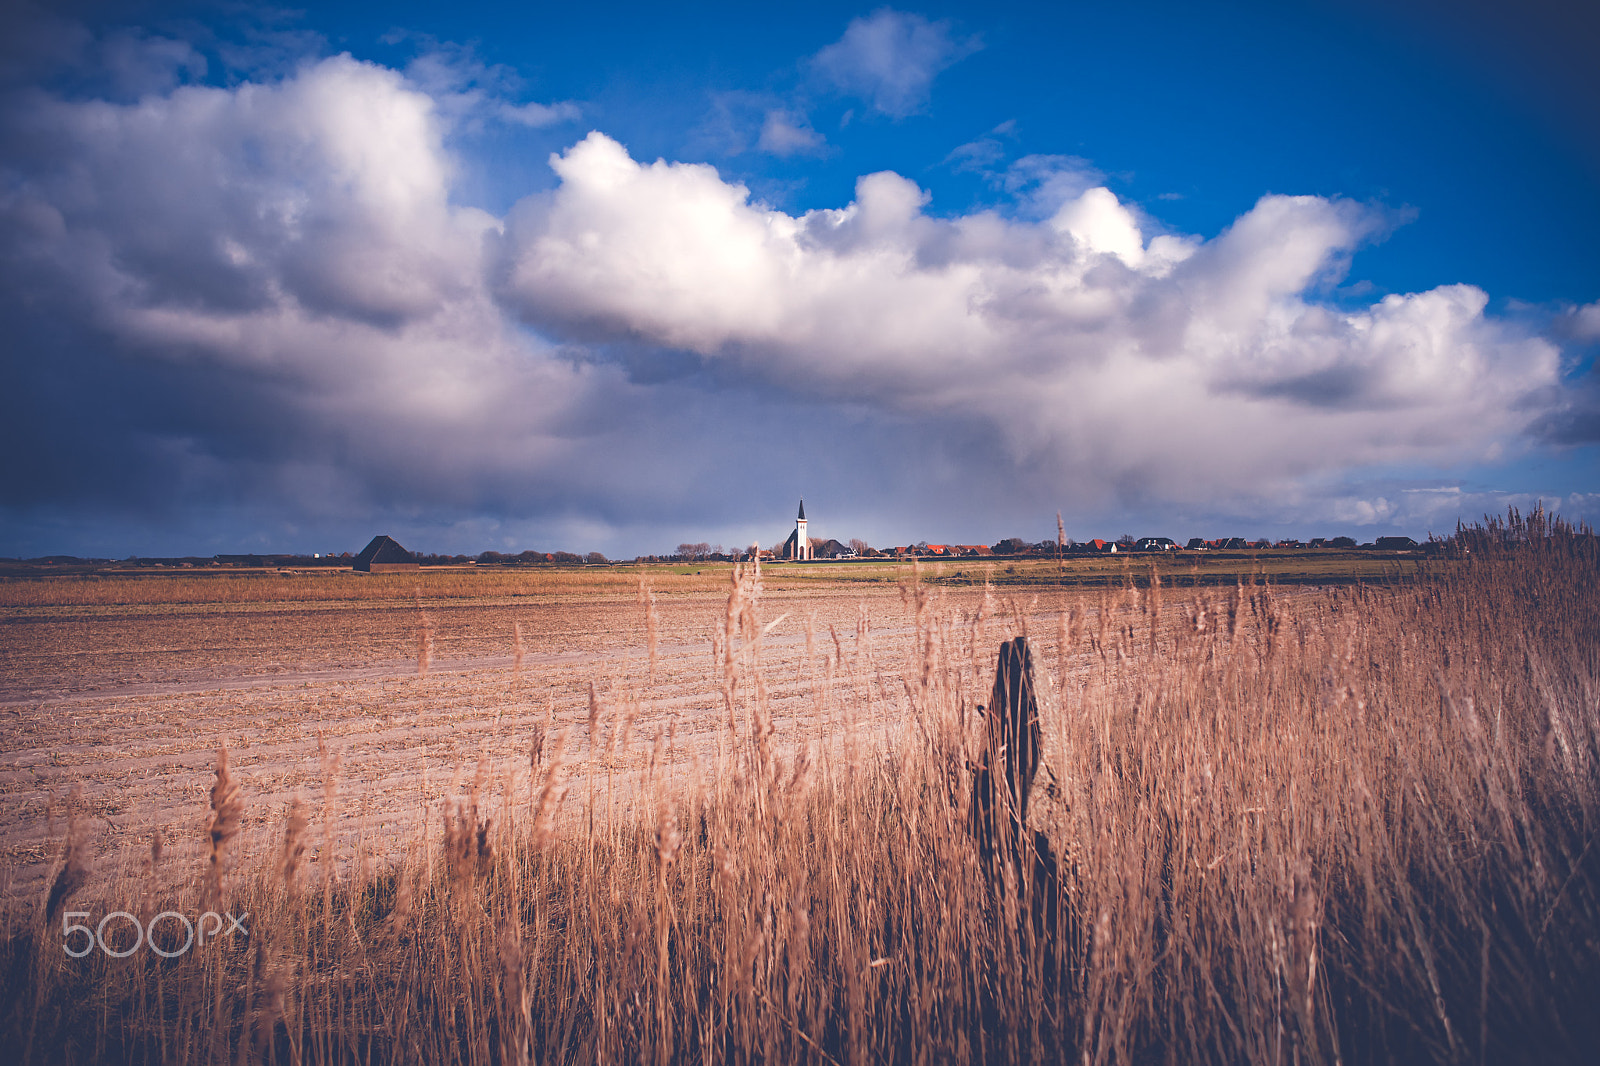 Sony 28mm F2.8 sample photo. Typical white church in landscape at the island, texel, holland photography